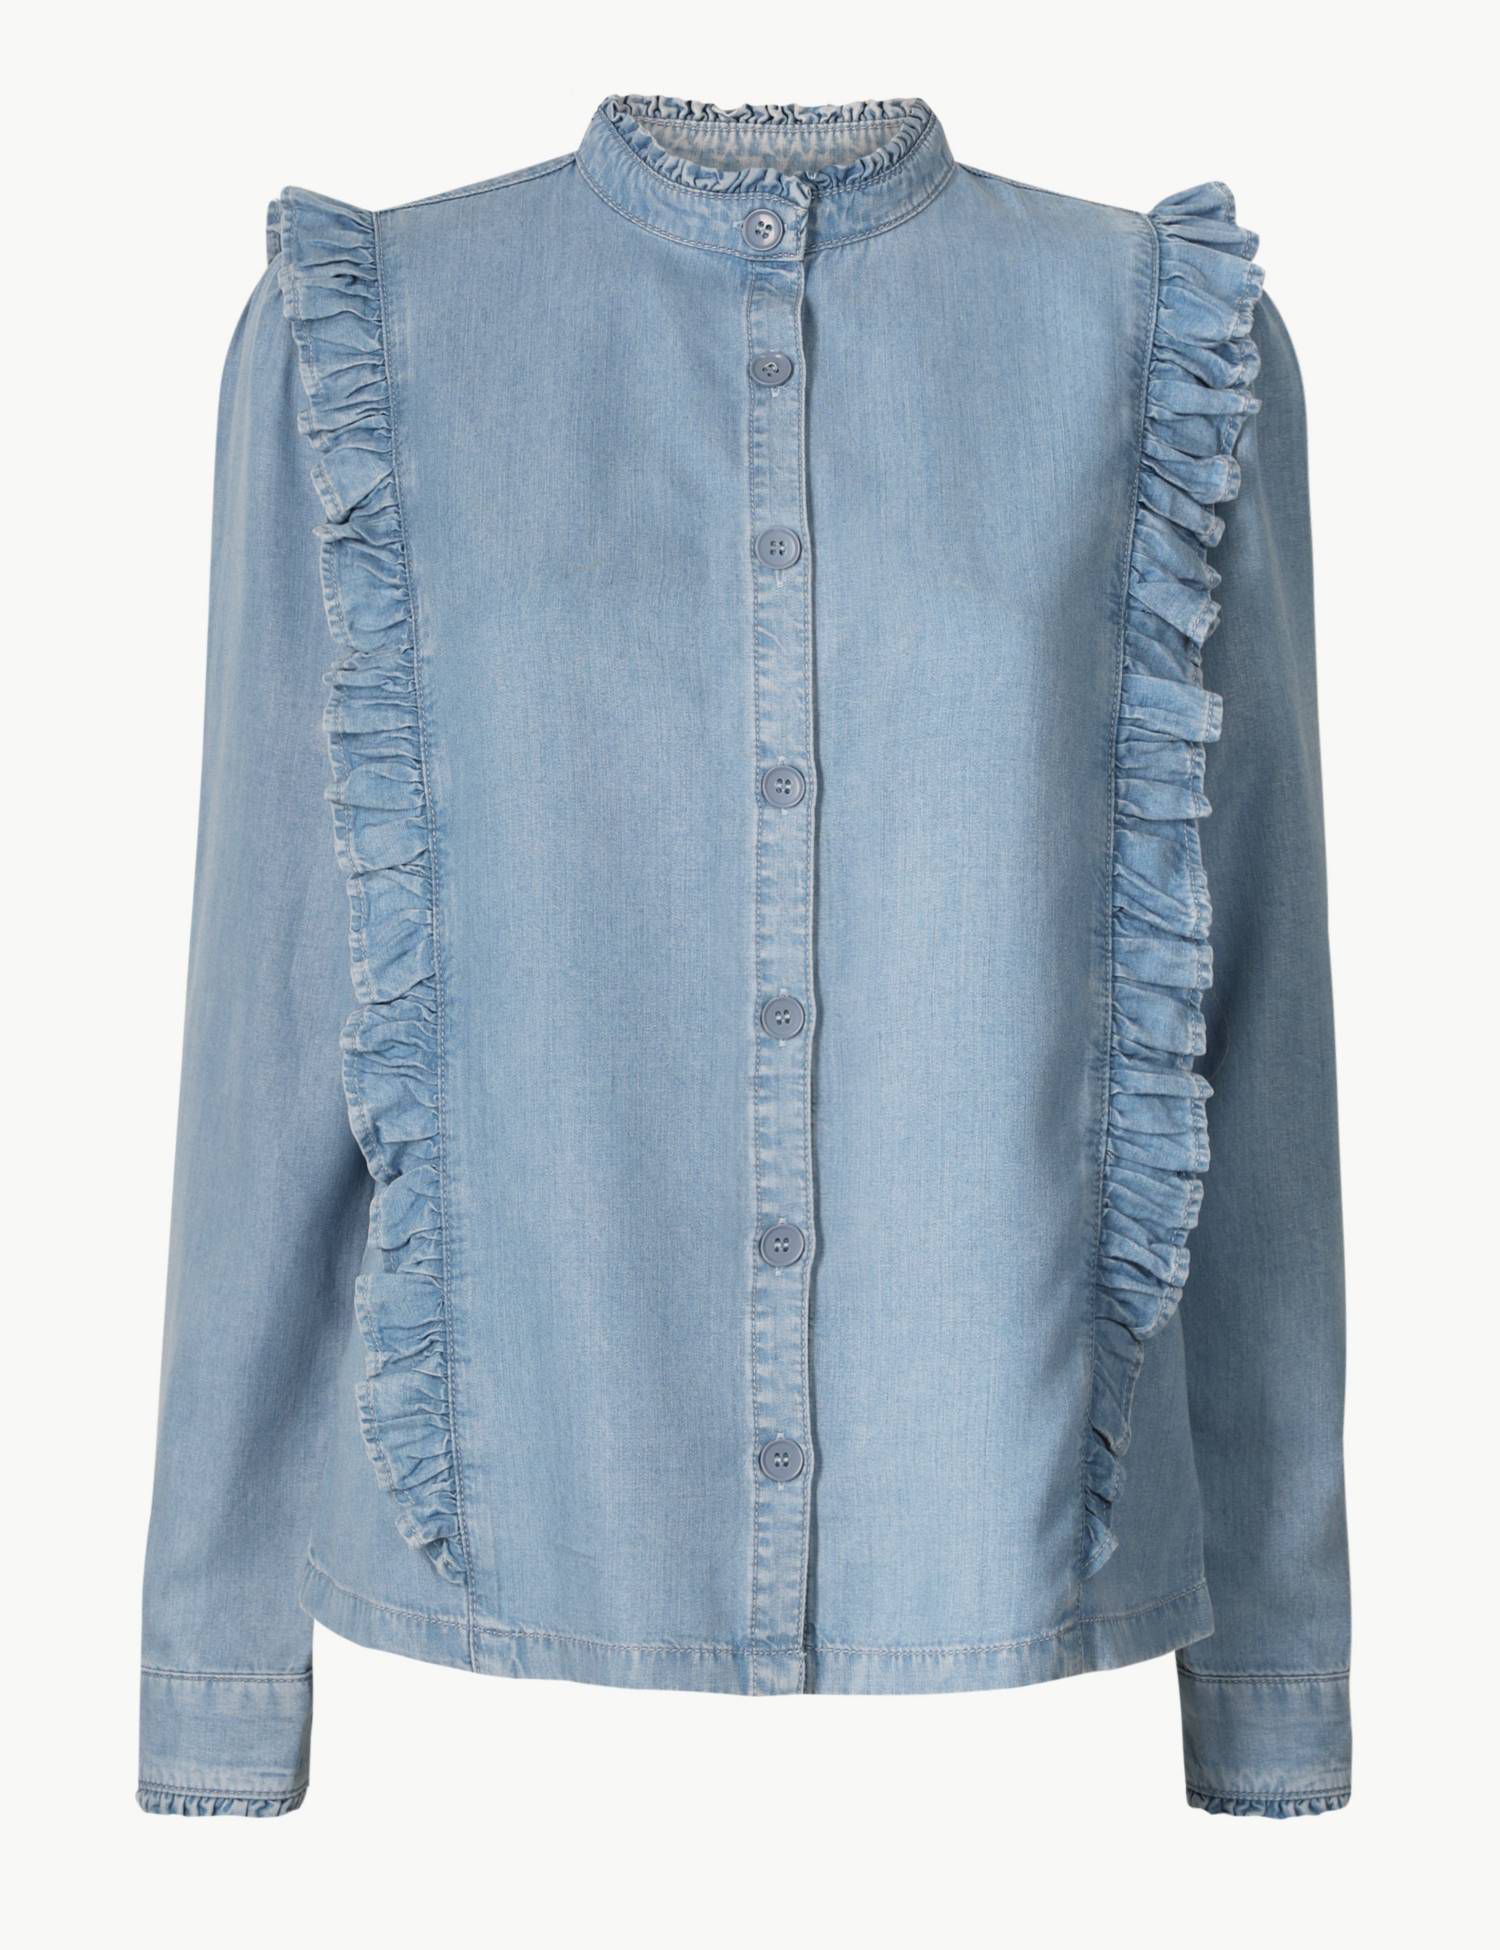 NEW M&S Womens Holly Willoughby Denim Ruffle Frill Shirt Blouse Top 6-24 RRP £32